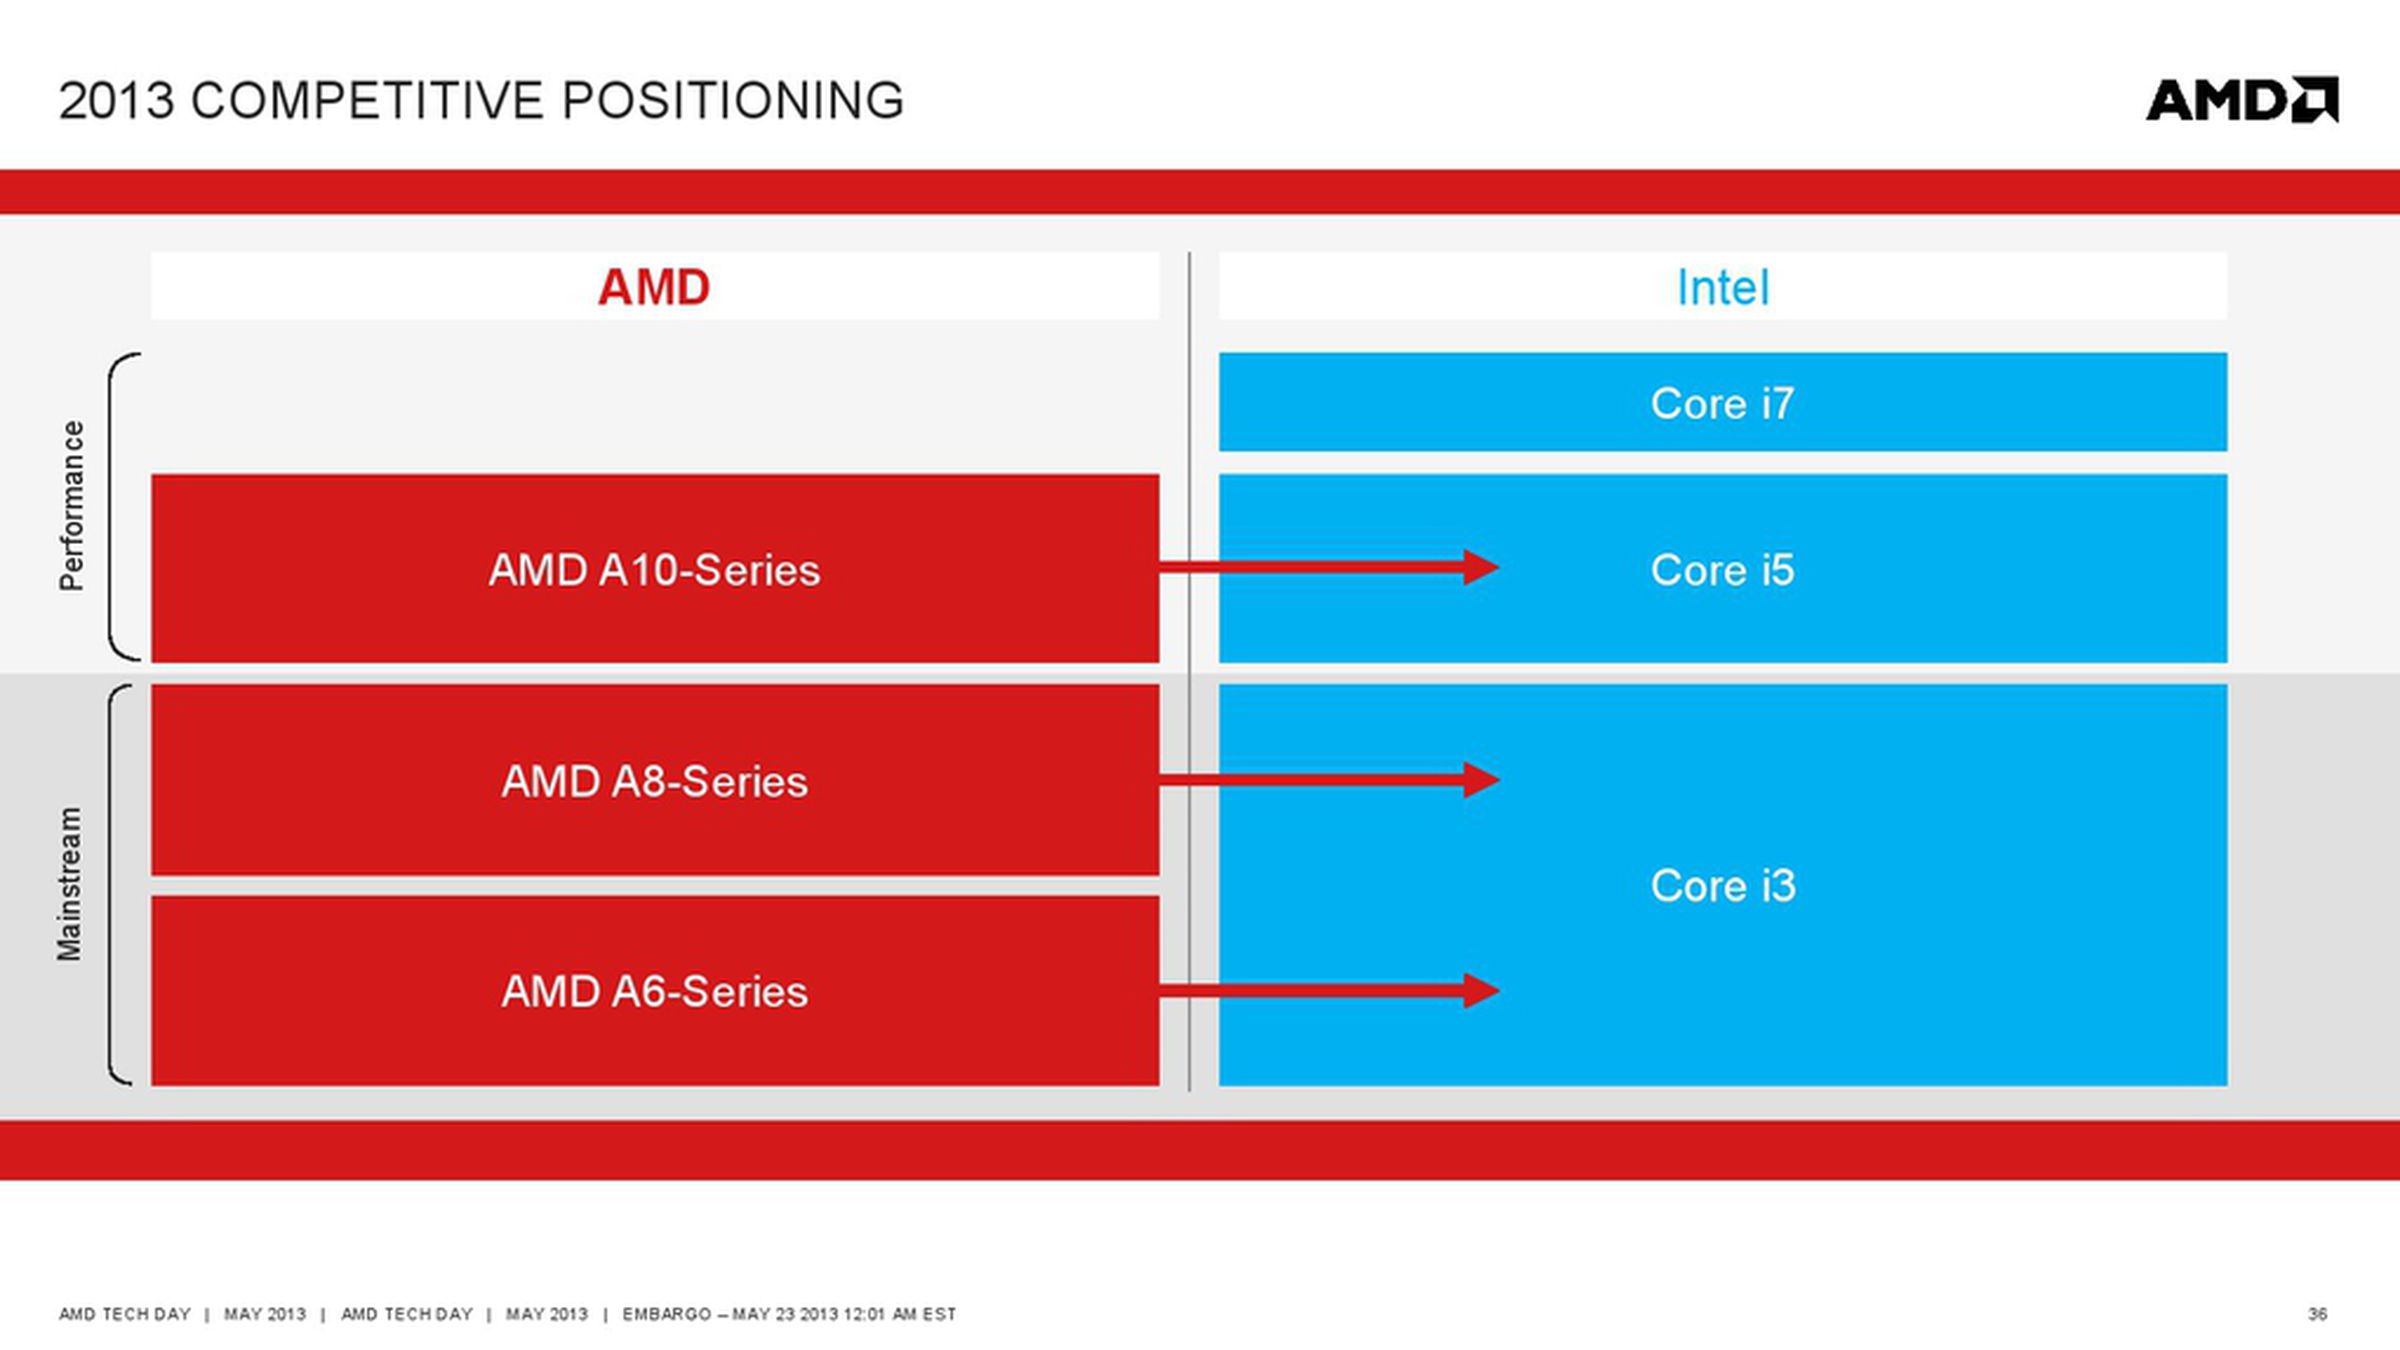 AMD Temash, Kabini, and Richland features and performance claims